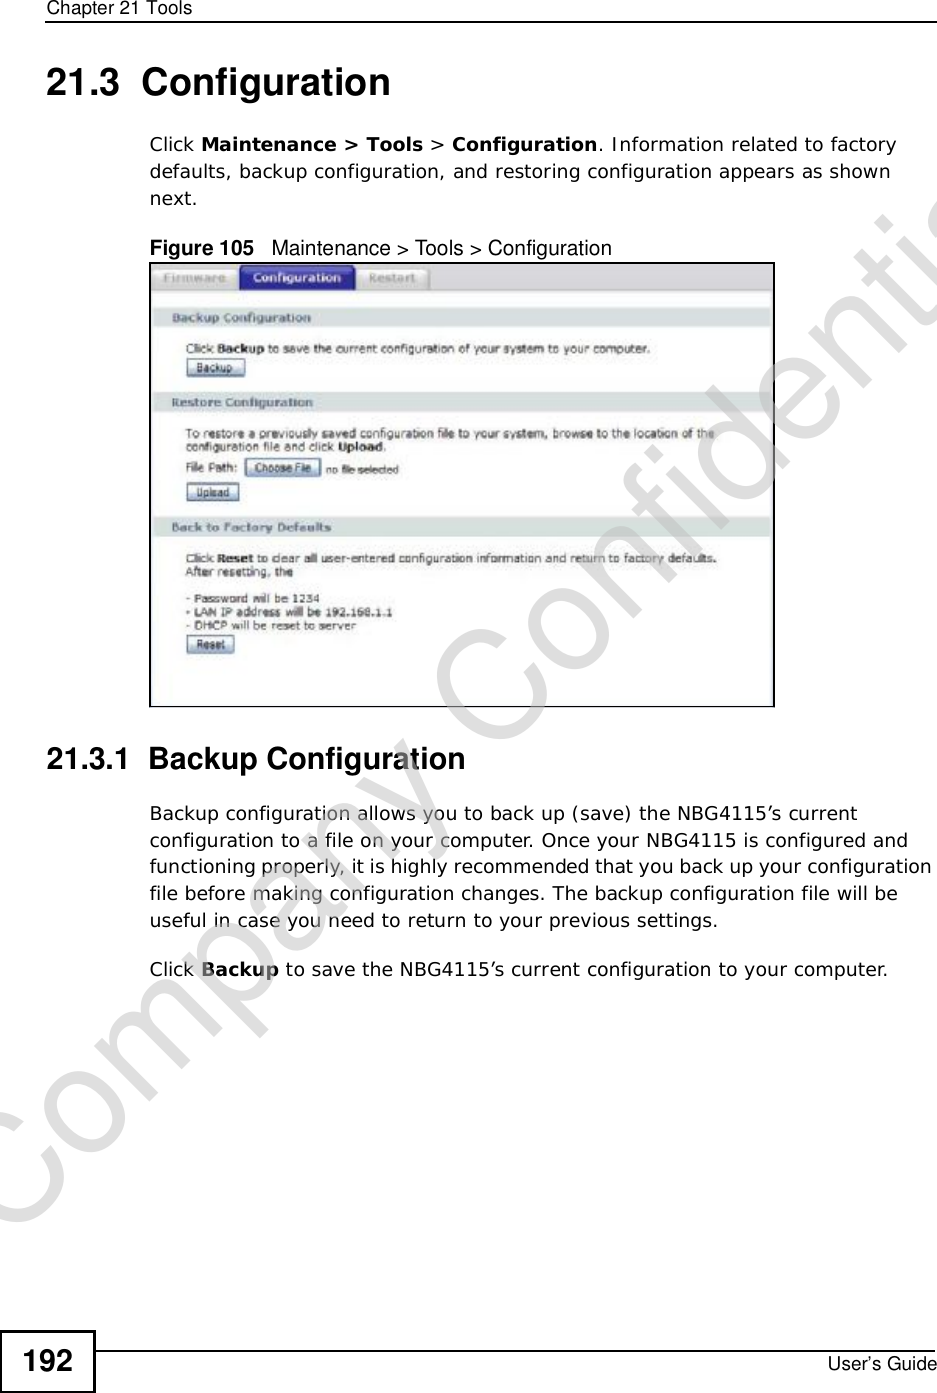 Chapter 21ToolsUser’s Guide19221.3  ConfigurationClick Maintenance &gt; Tools &gt; Configuration. Information related to factory defaults, backup configuration, and restoring configuration appears as shown next.Figure 105   Maintenance &gt; Tools &gt; Configuration 21.3.1  Backup ConfigurationBackup configuration allows you to back up (save) the NBG4115’s current configuration to a file on your computer. Once your NBG4115 is configured and functioning properly, it is highly recommended that you back up your configuration file before making configuration changes. The backup configuration file will be useful in case you need to return to your previous settings. Click Backup to save the NBG4115’s current configuration to your computer.Company Confidential